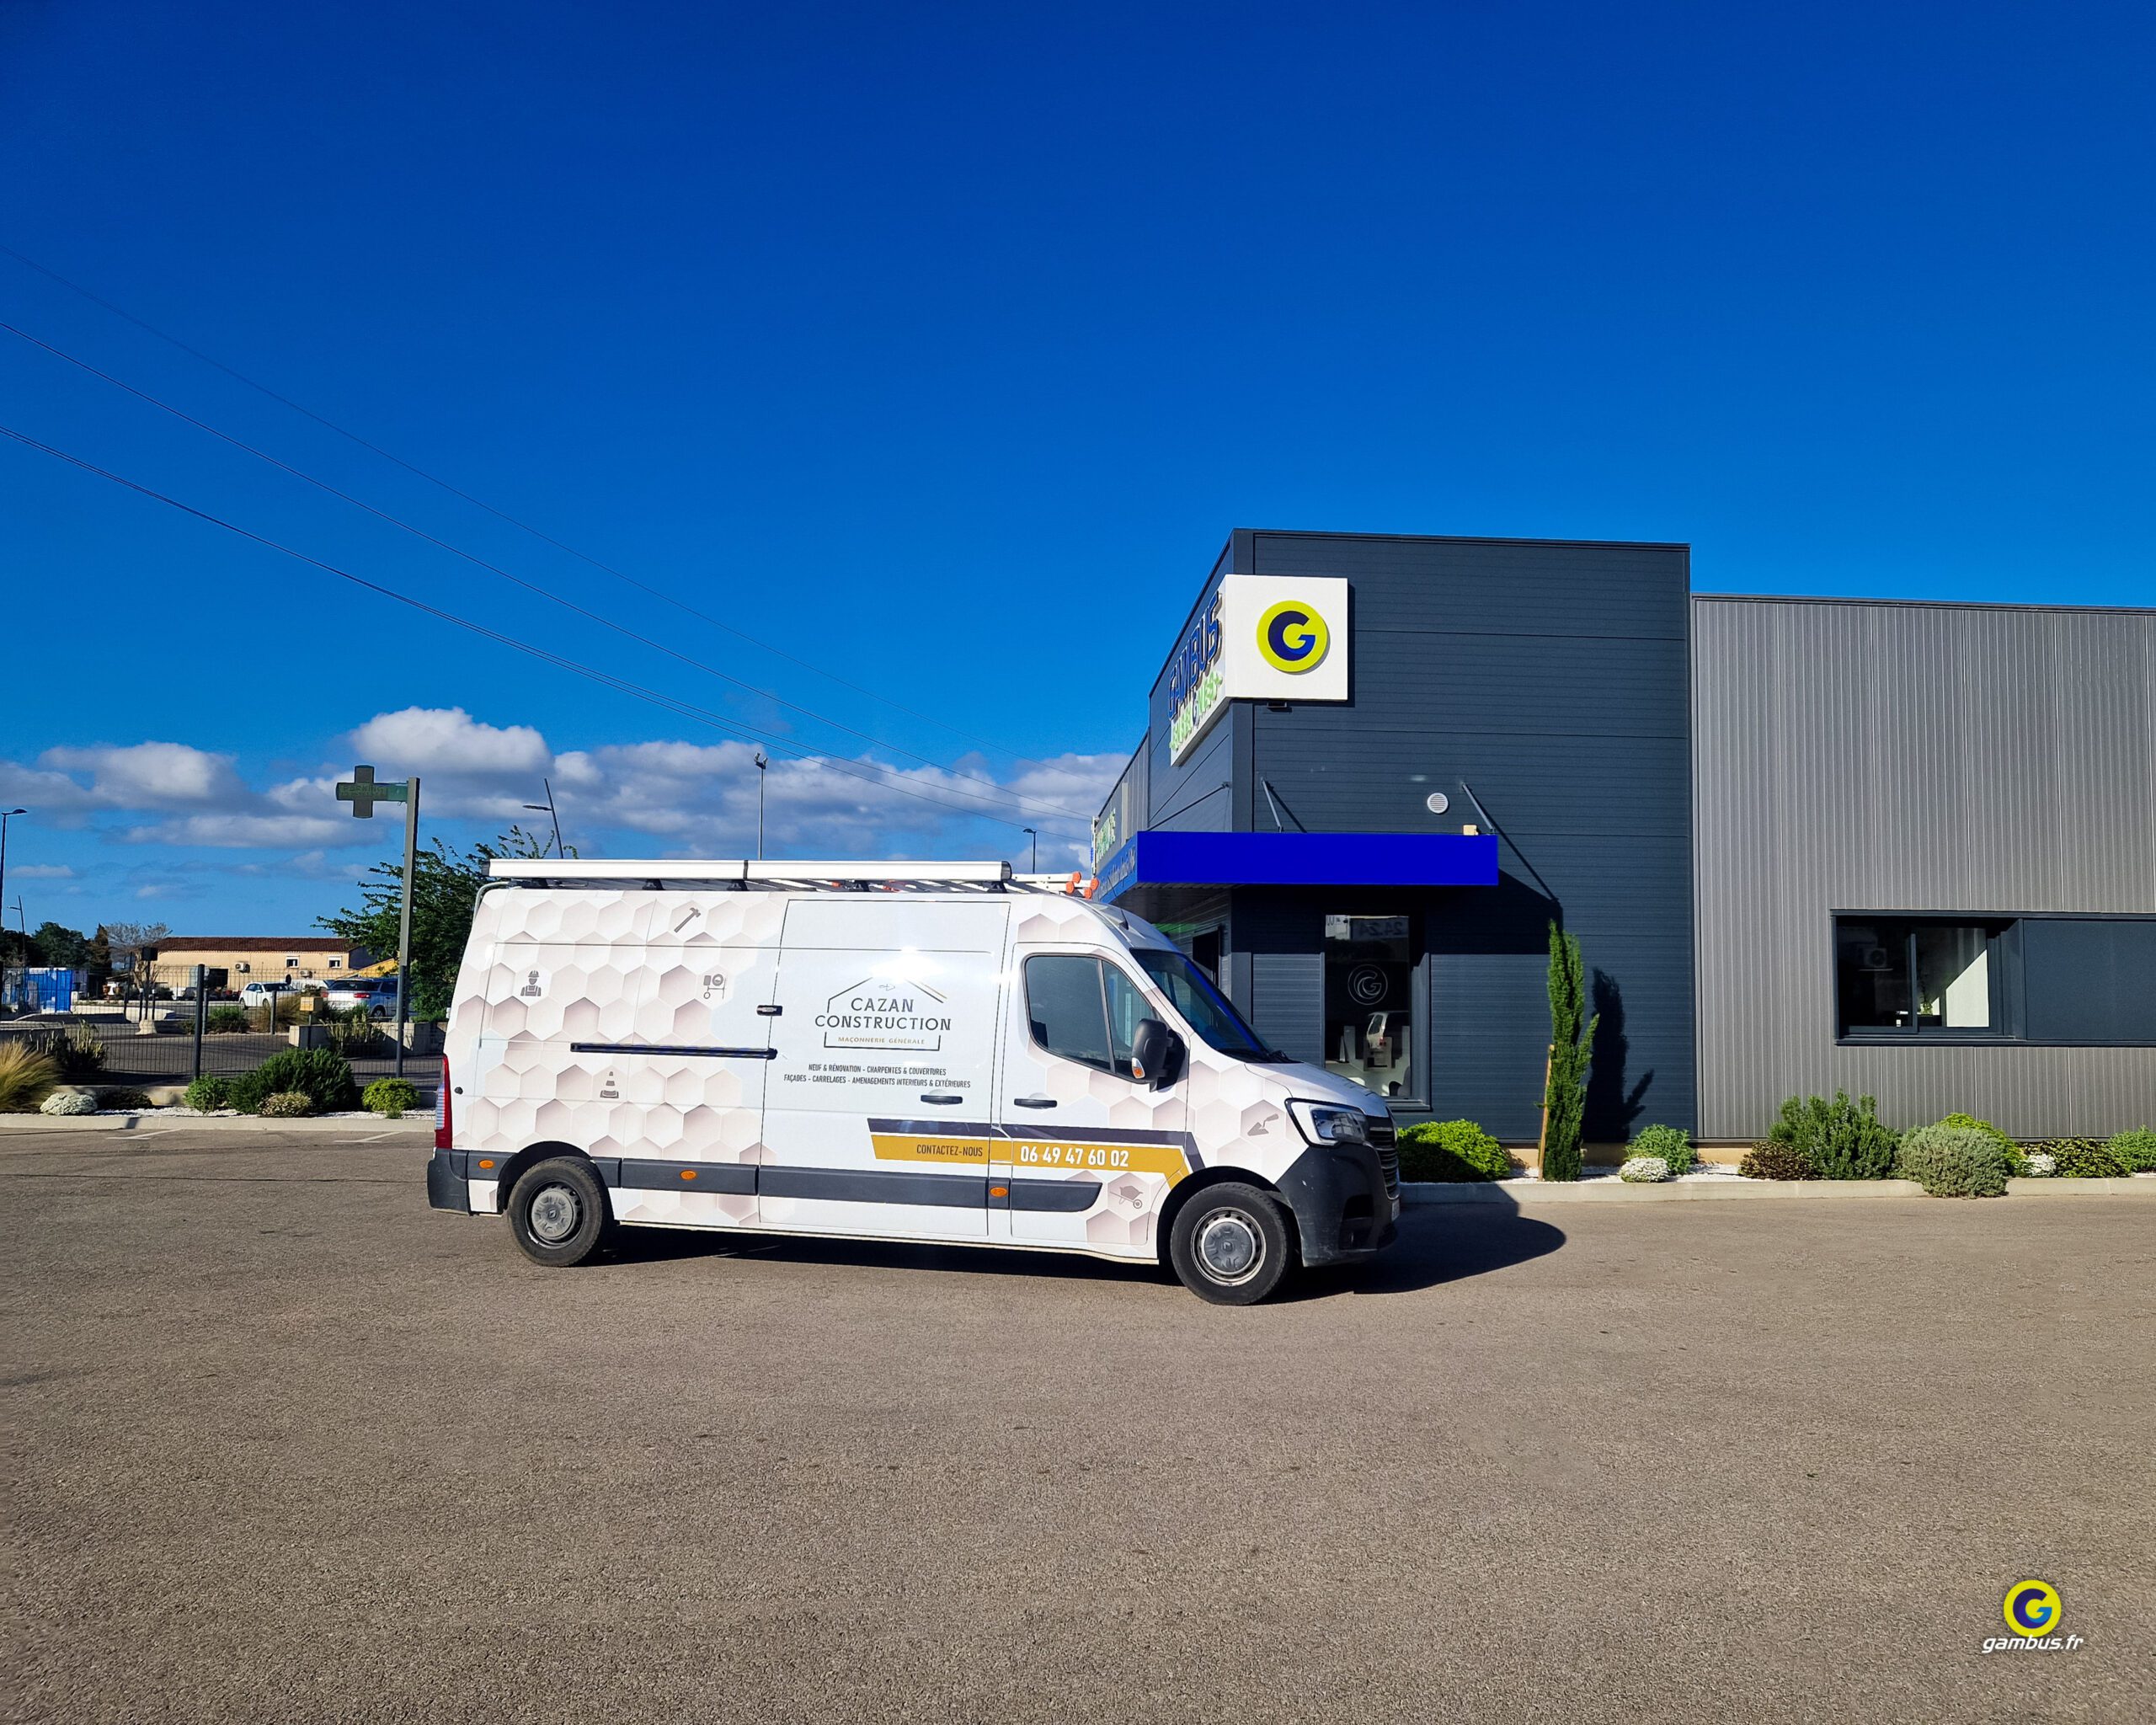 Vehicules Covering Publicitaire Renault Master Cazan Construction Vernegues 2024 5 Scaled, Gambus Enseignes